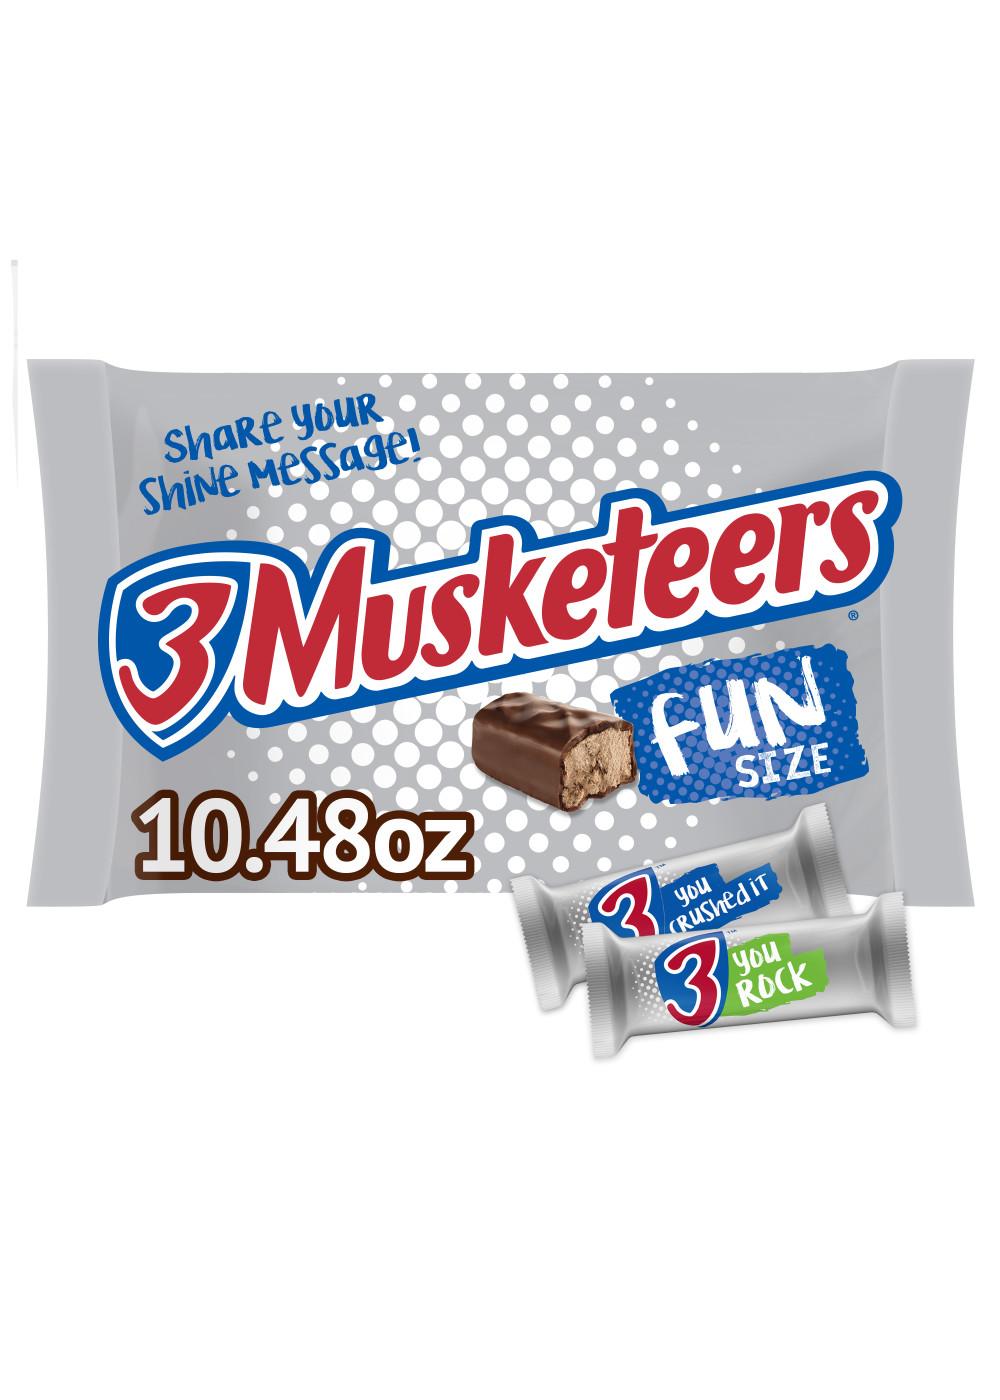 3 Musketeers Fun Size Candy Bars; image 7 of 10